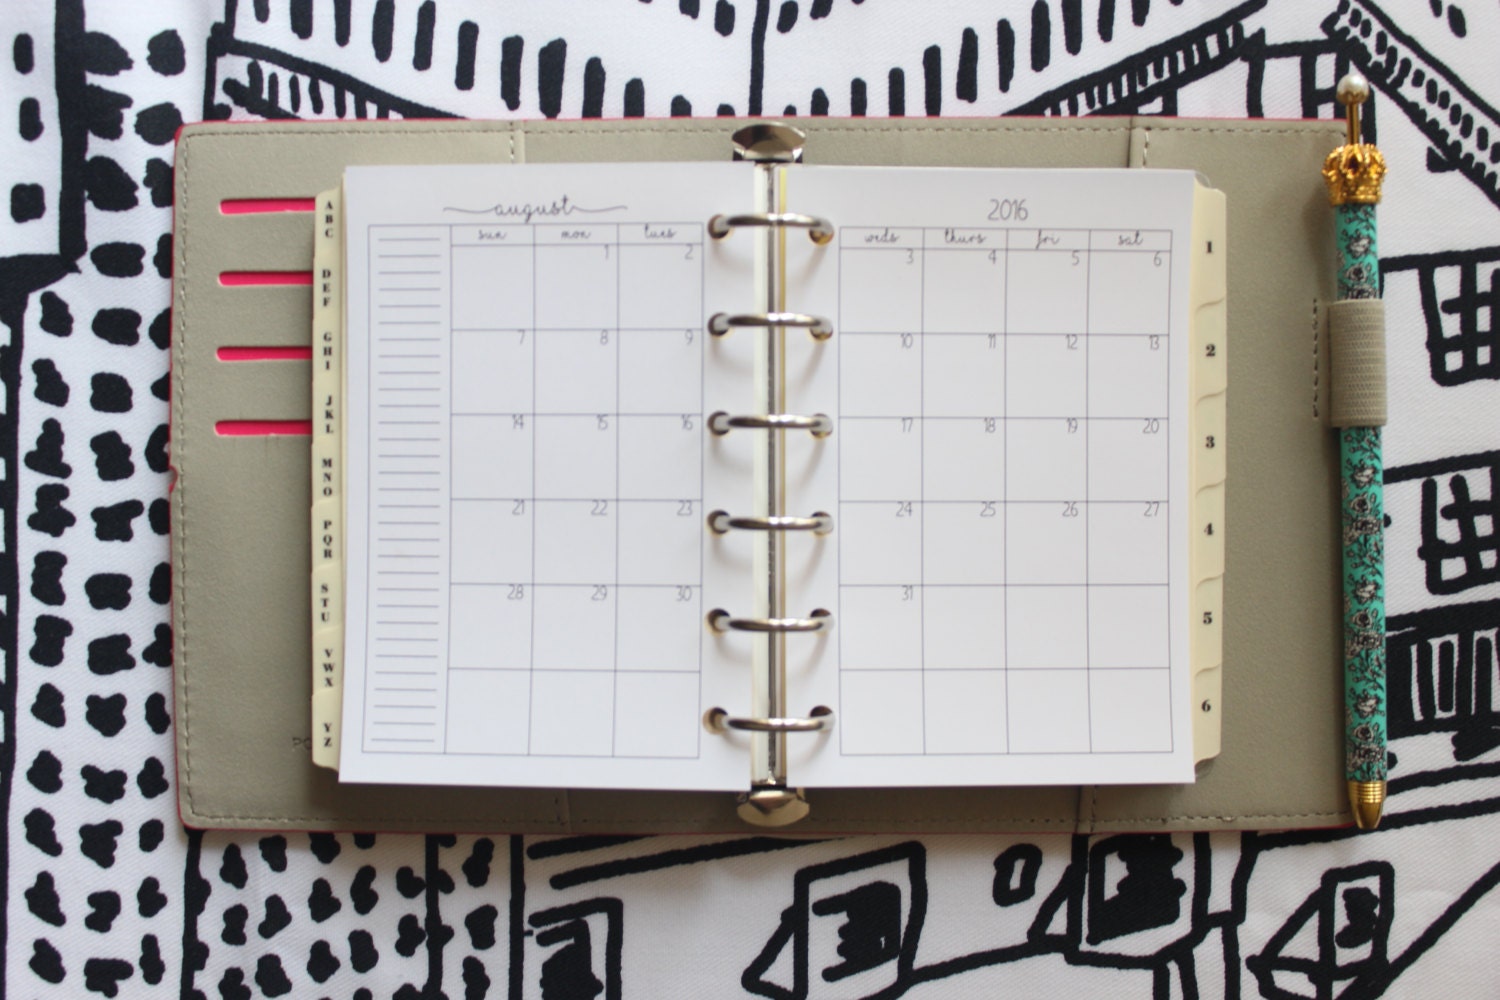 fits your 6 Ring Agenda, Office, Buy Refill Calendar Inserts Filler Paper  Bundle Packages In Pm Mm Gm Sizes